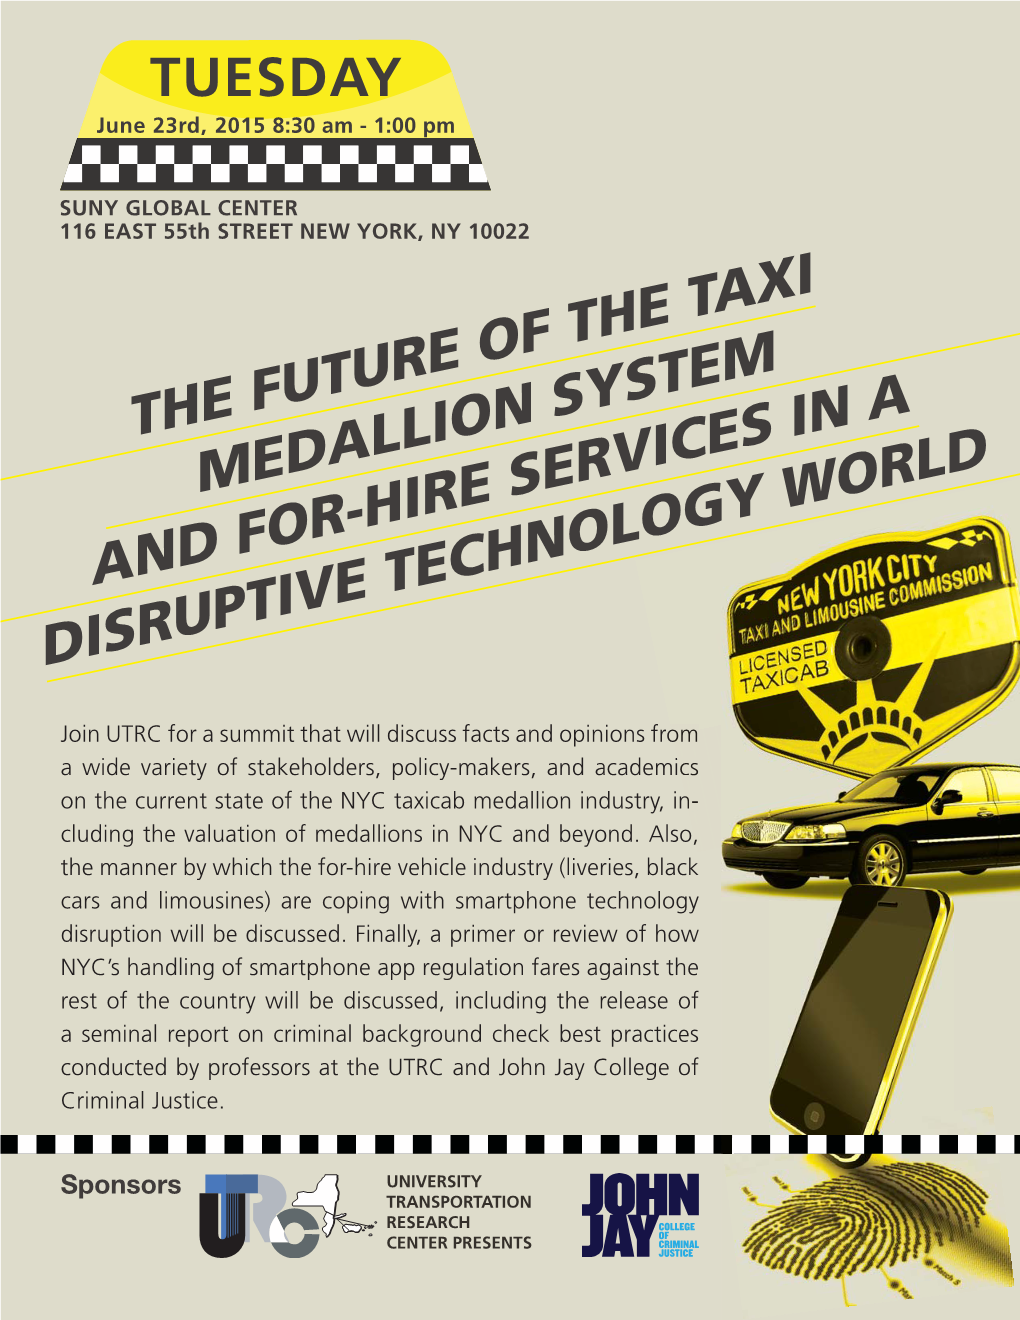 The Future of the Taxi Medallion System and For-Hire Services in a Disruptive Technology World